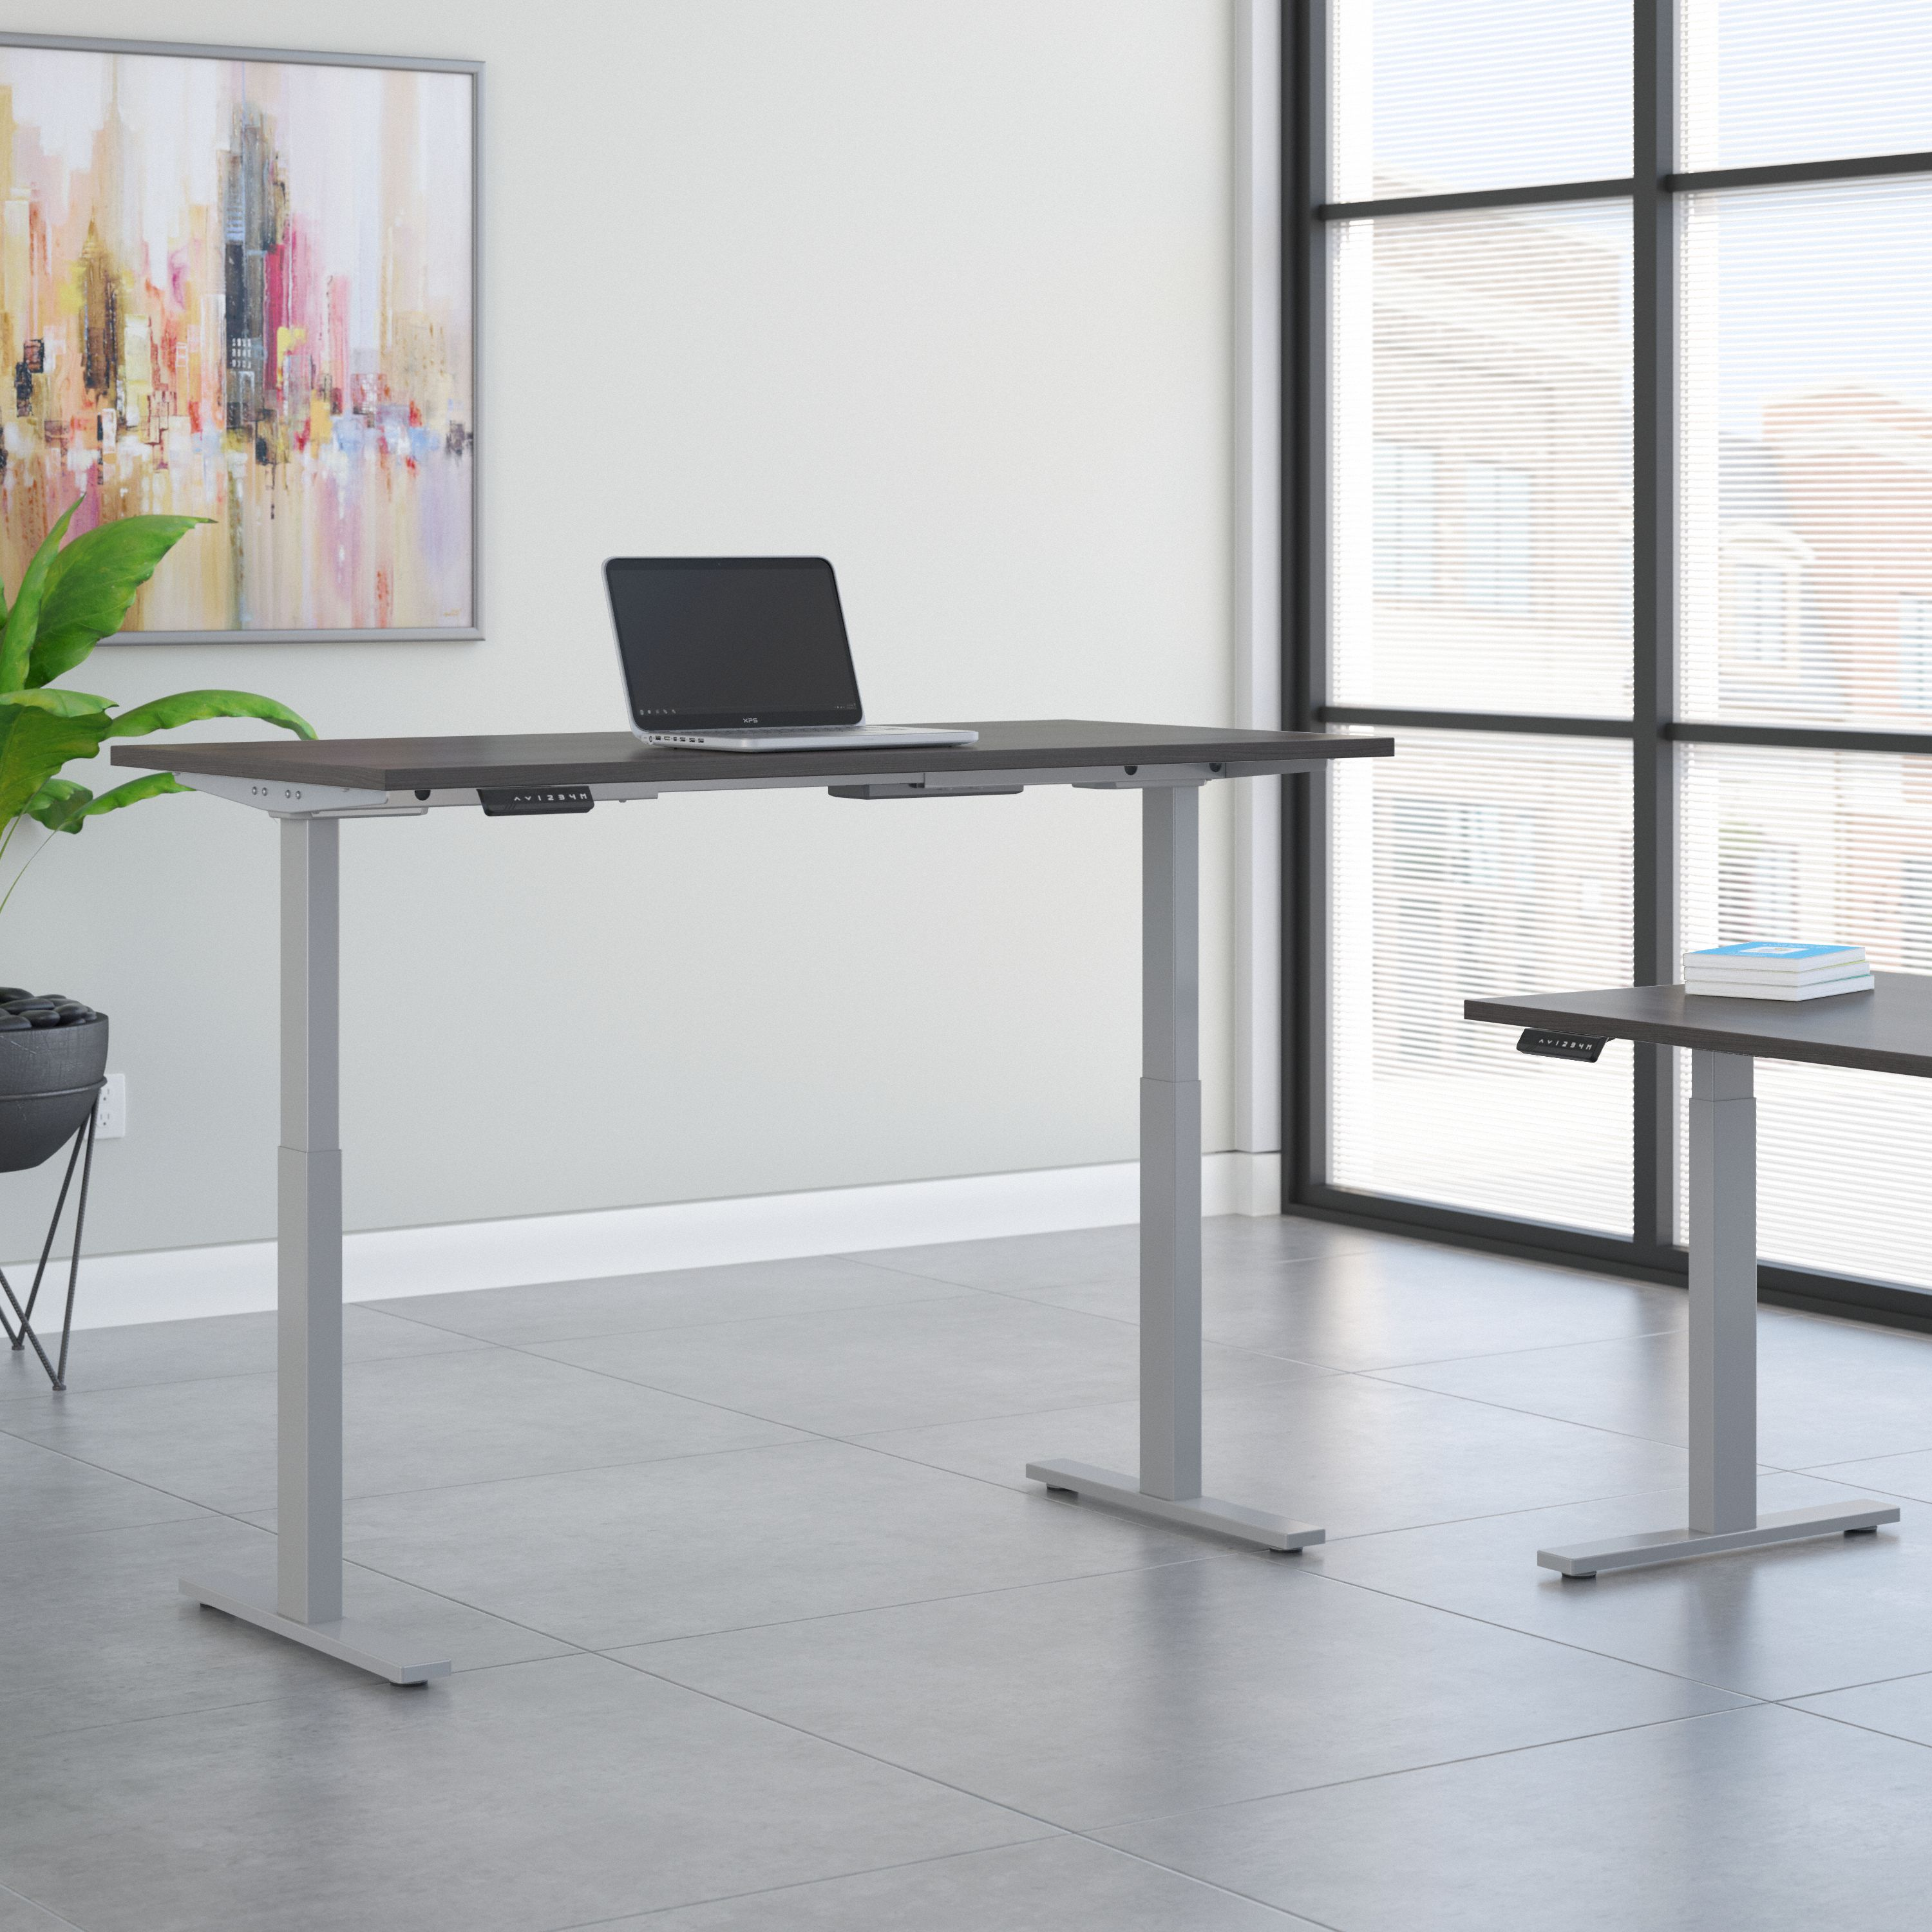 Shop Move 60 Series by Bush Business Furniture 60W x 30D Height Adjustable Standing Desk 01 M6S6030SGSK #color_storm gray/cool gray metallic